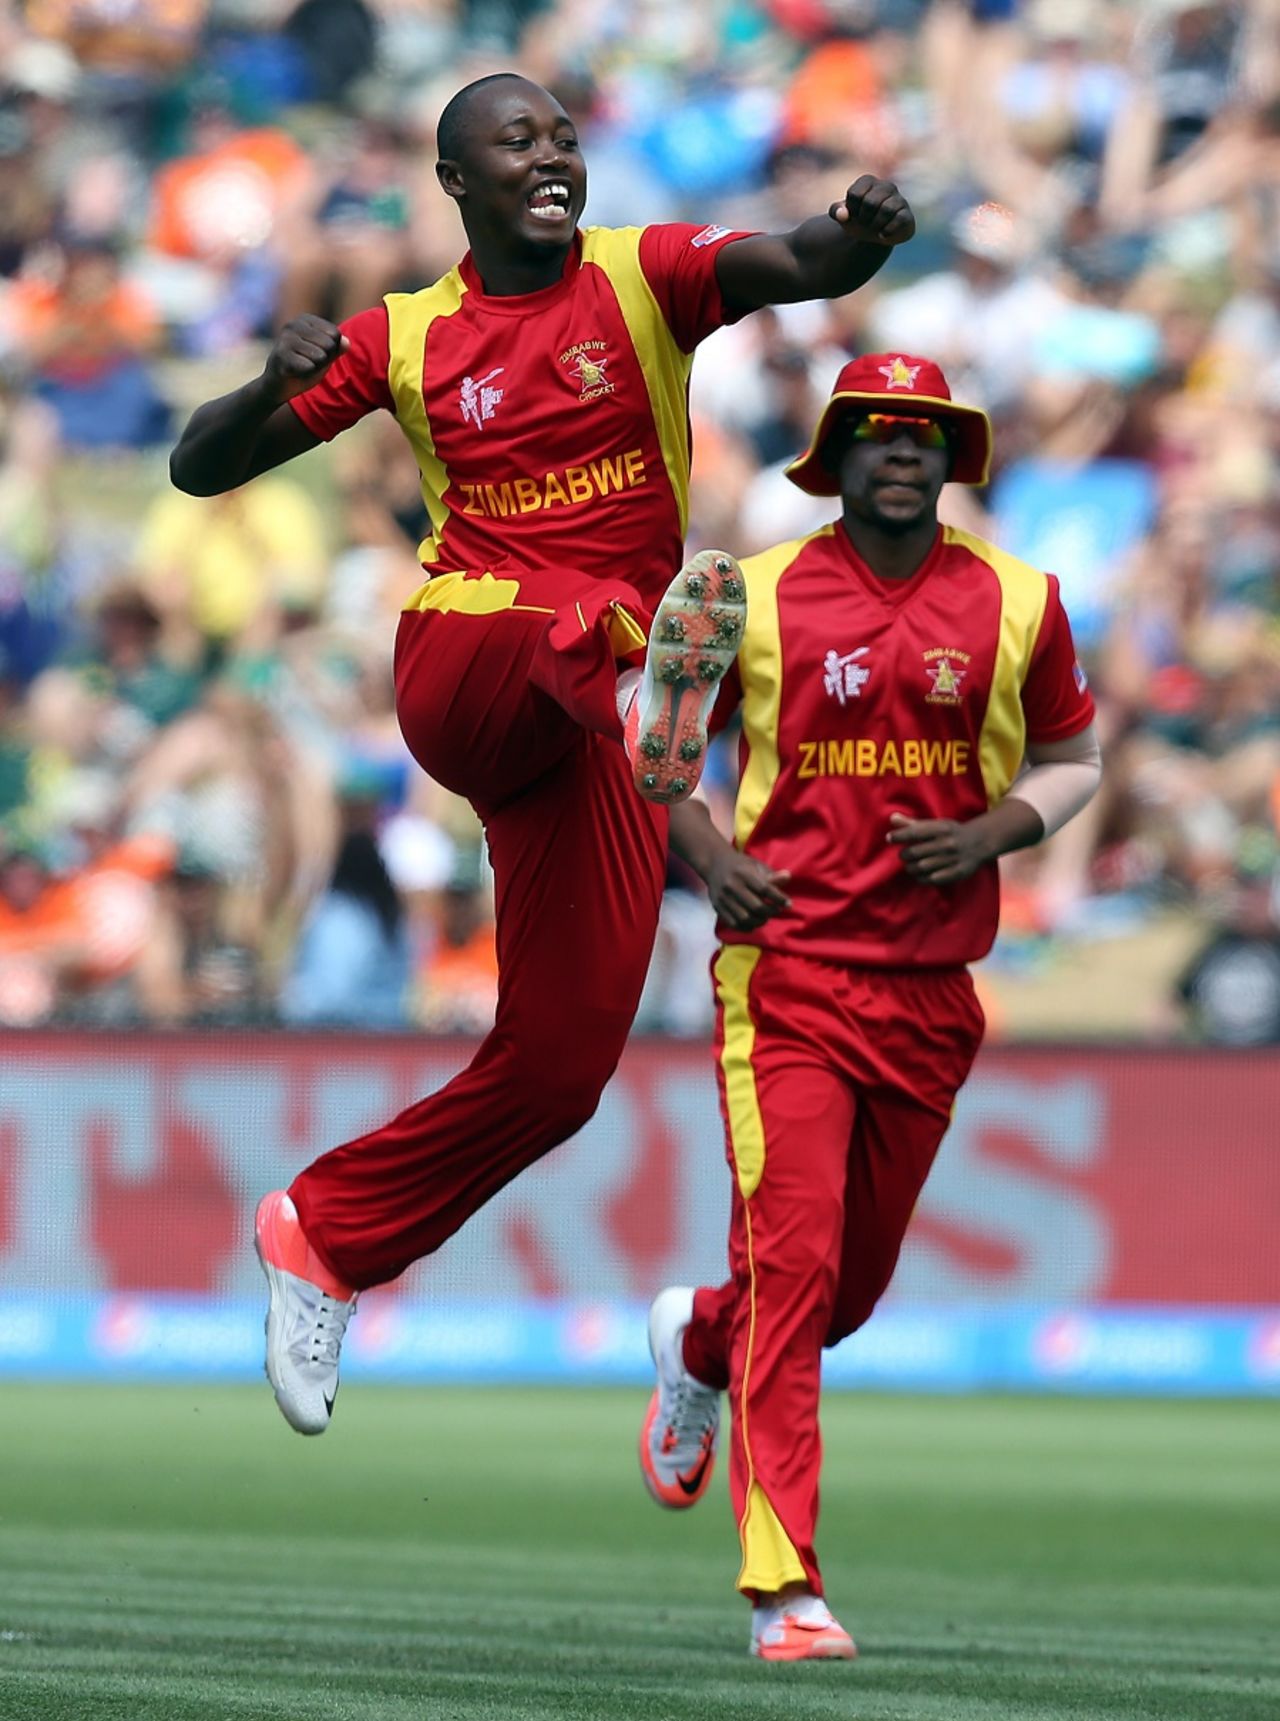 Tendai Chatara leaps after taking a wicket, South Africa v Zimbabwe, Group B, World Cup 2015, Hamilton, February 15 2015